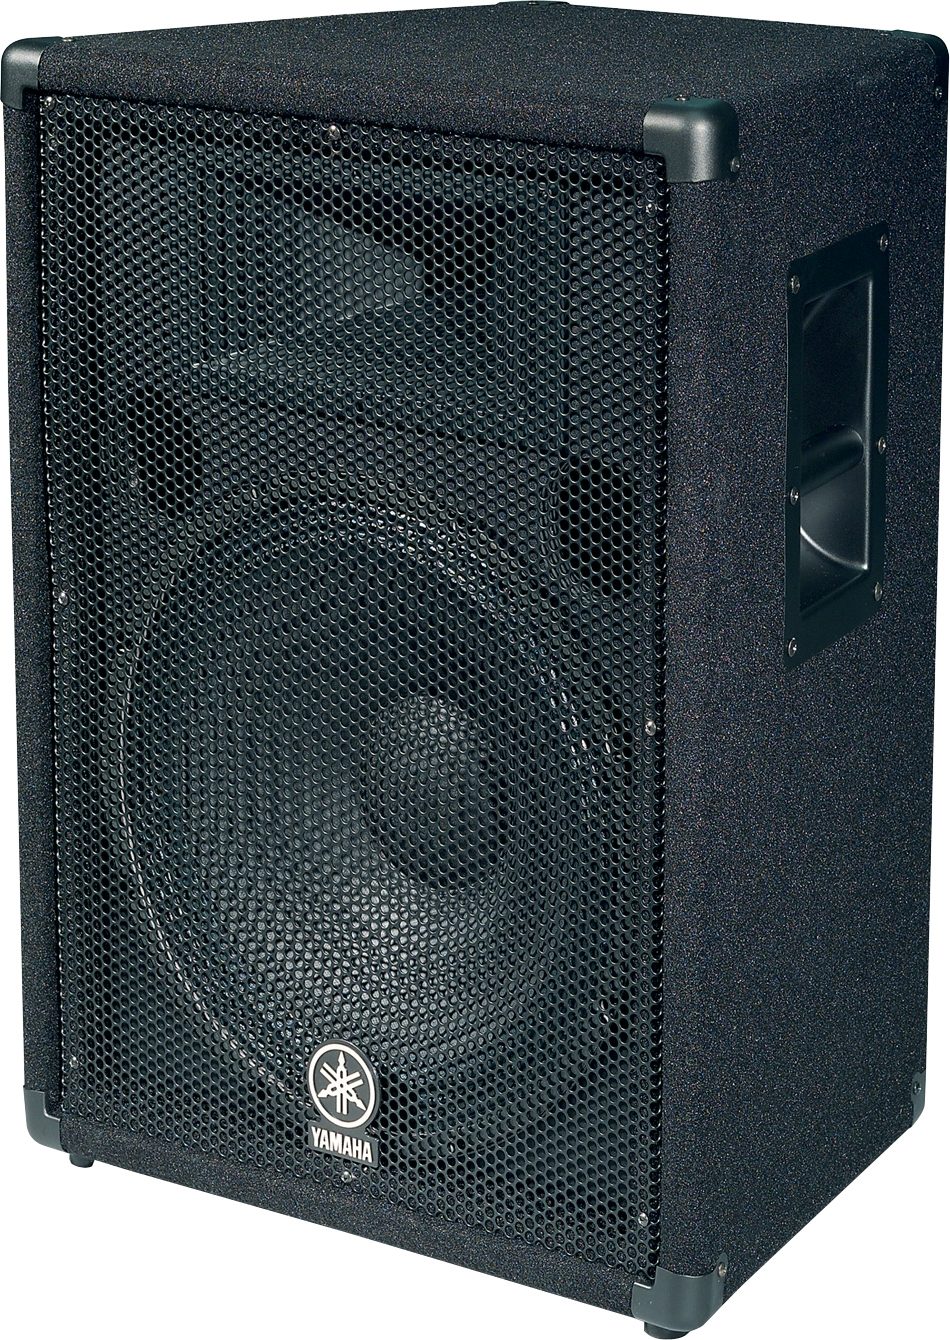 Yamaha CM12V 12" 2-way Monitor Loud speaker excellent condition 